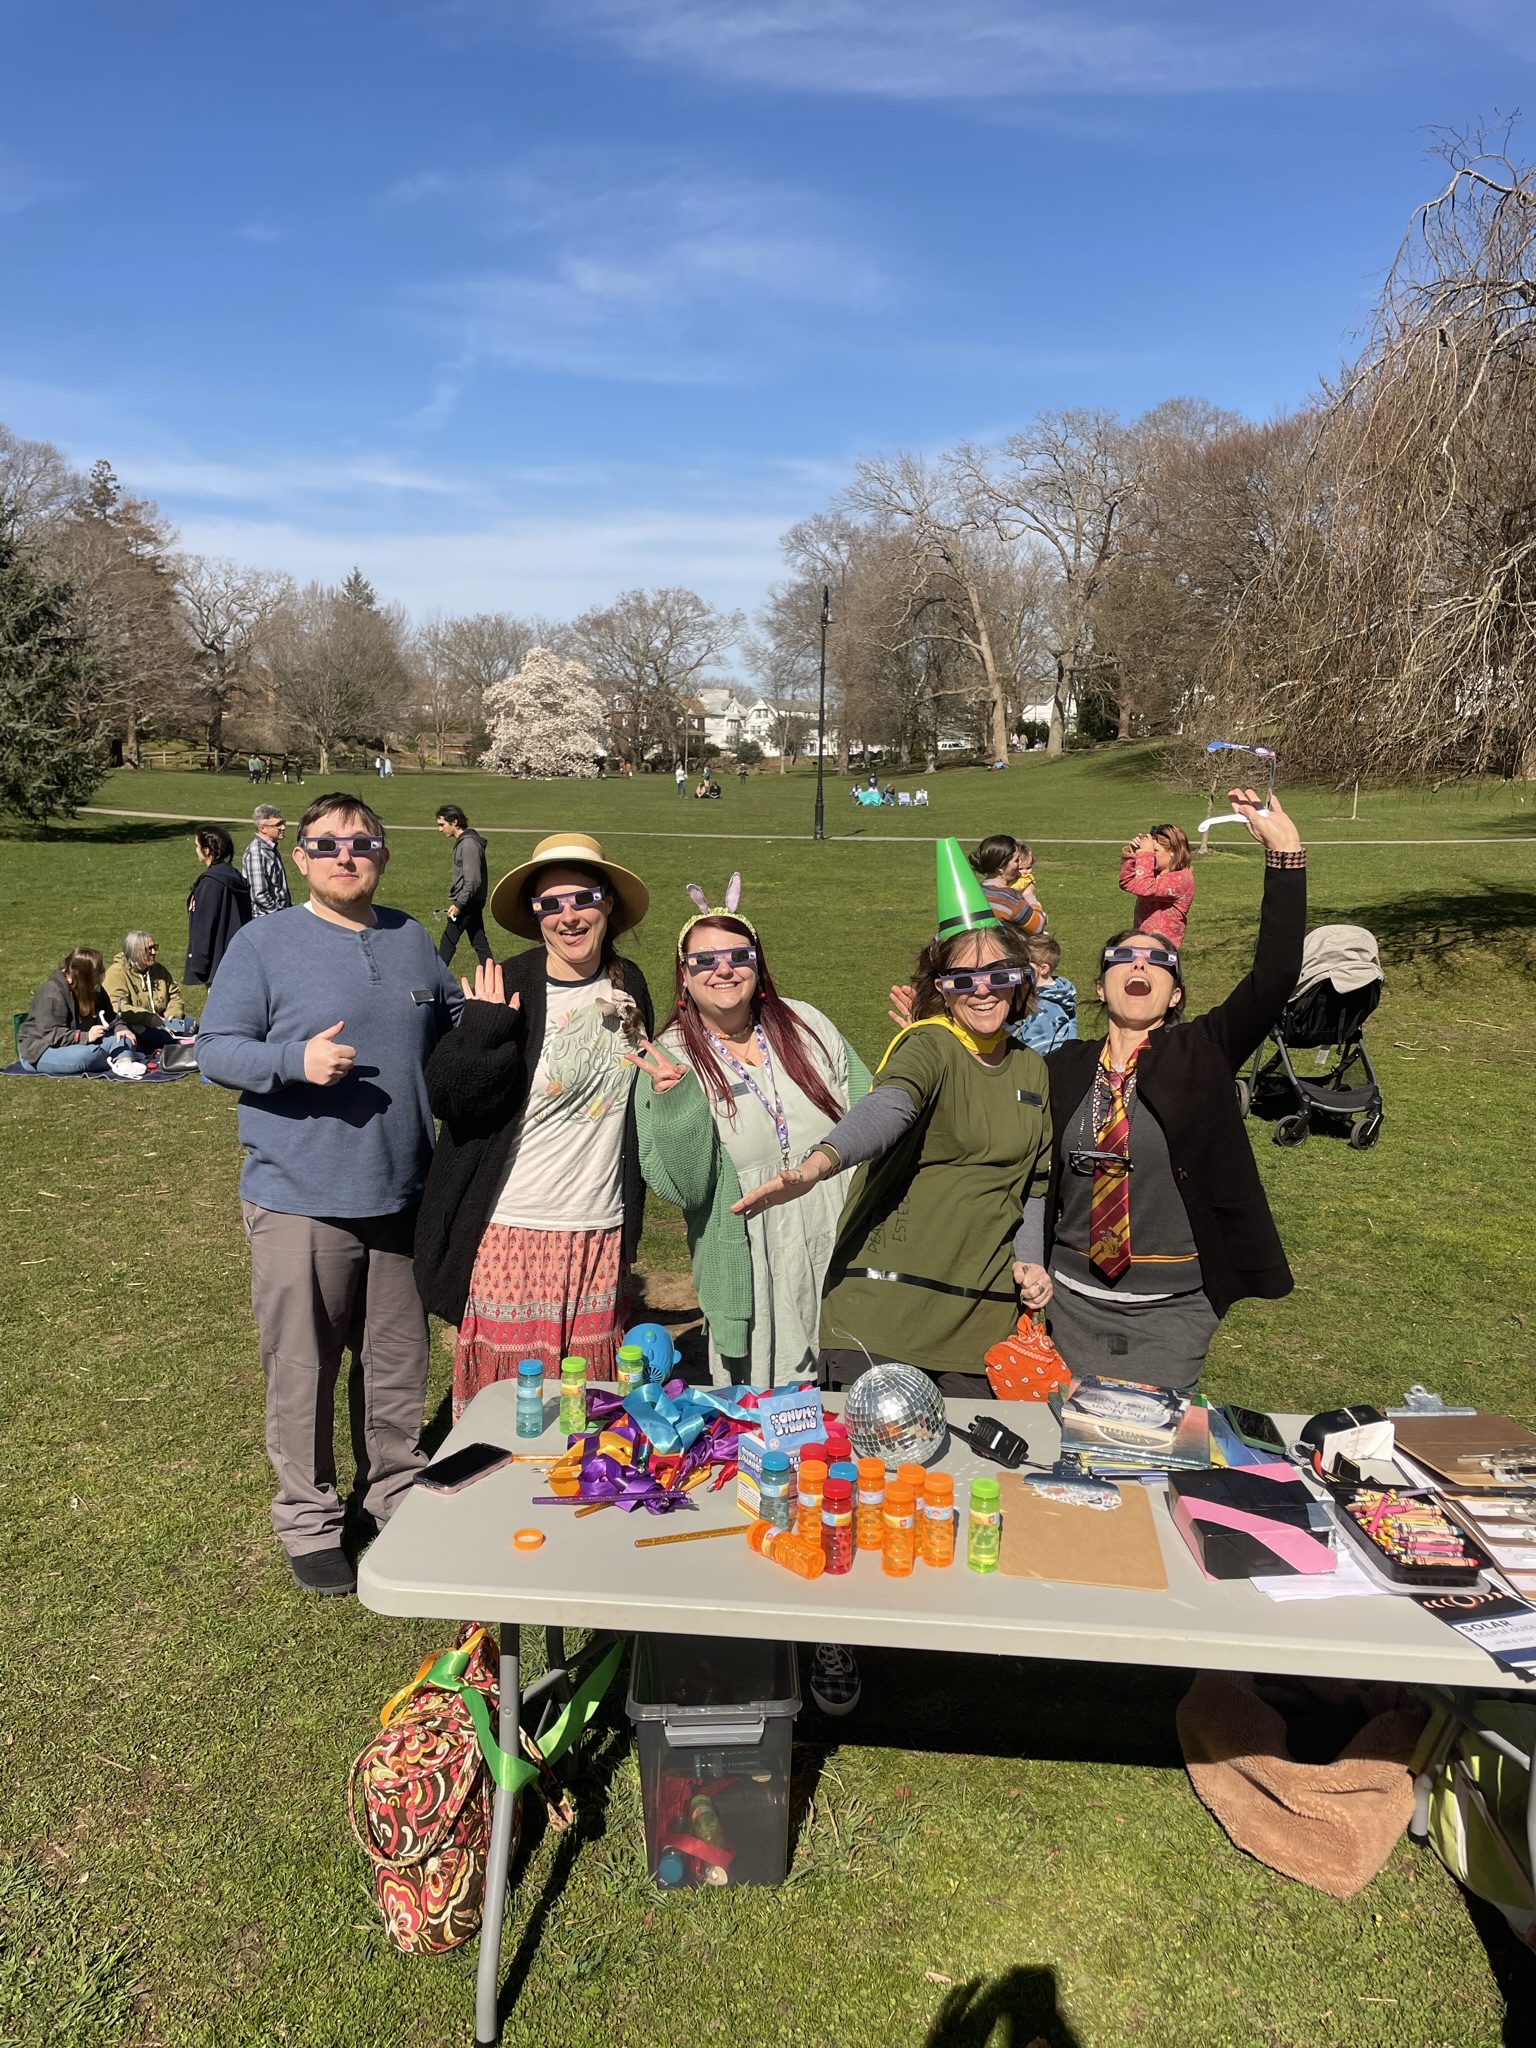 Photo of five Youth Services library staff in front of a table in Wilcox Park during the solar eclipse. Library workers are posing and waving with solar eclipse glasses on.